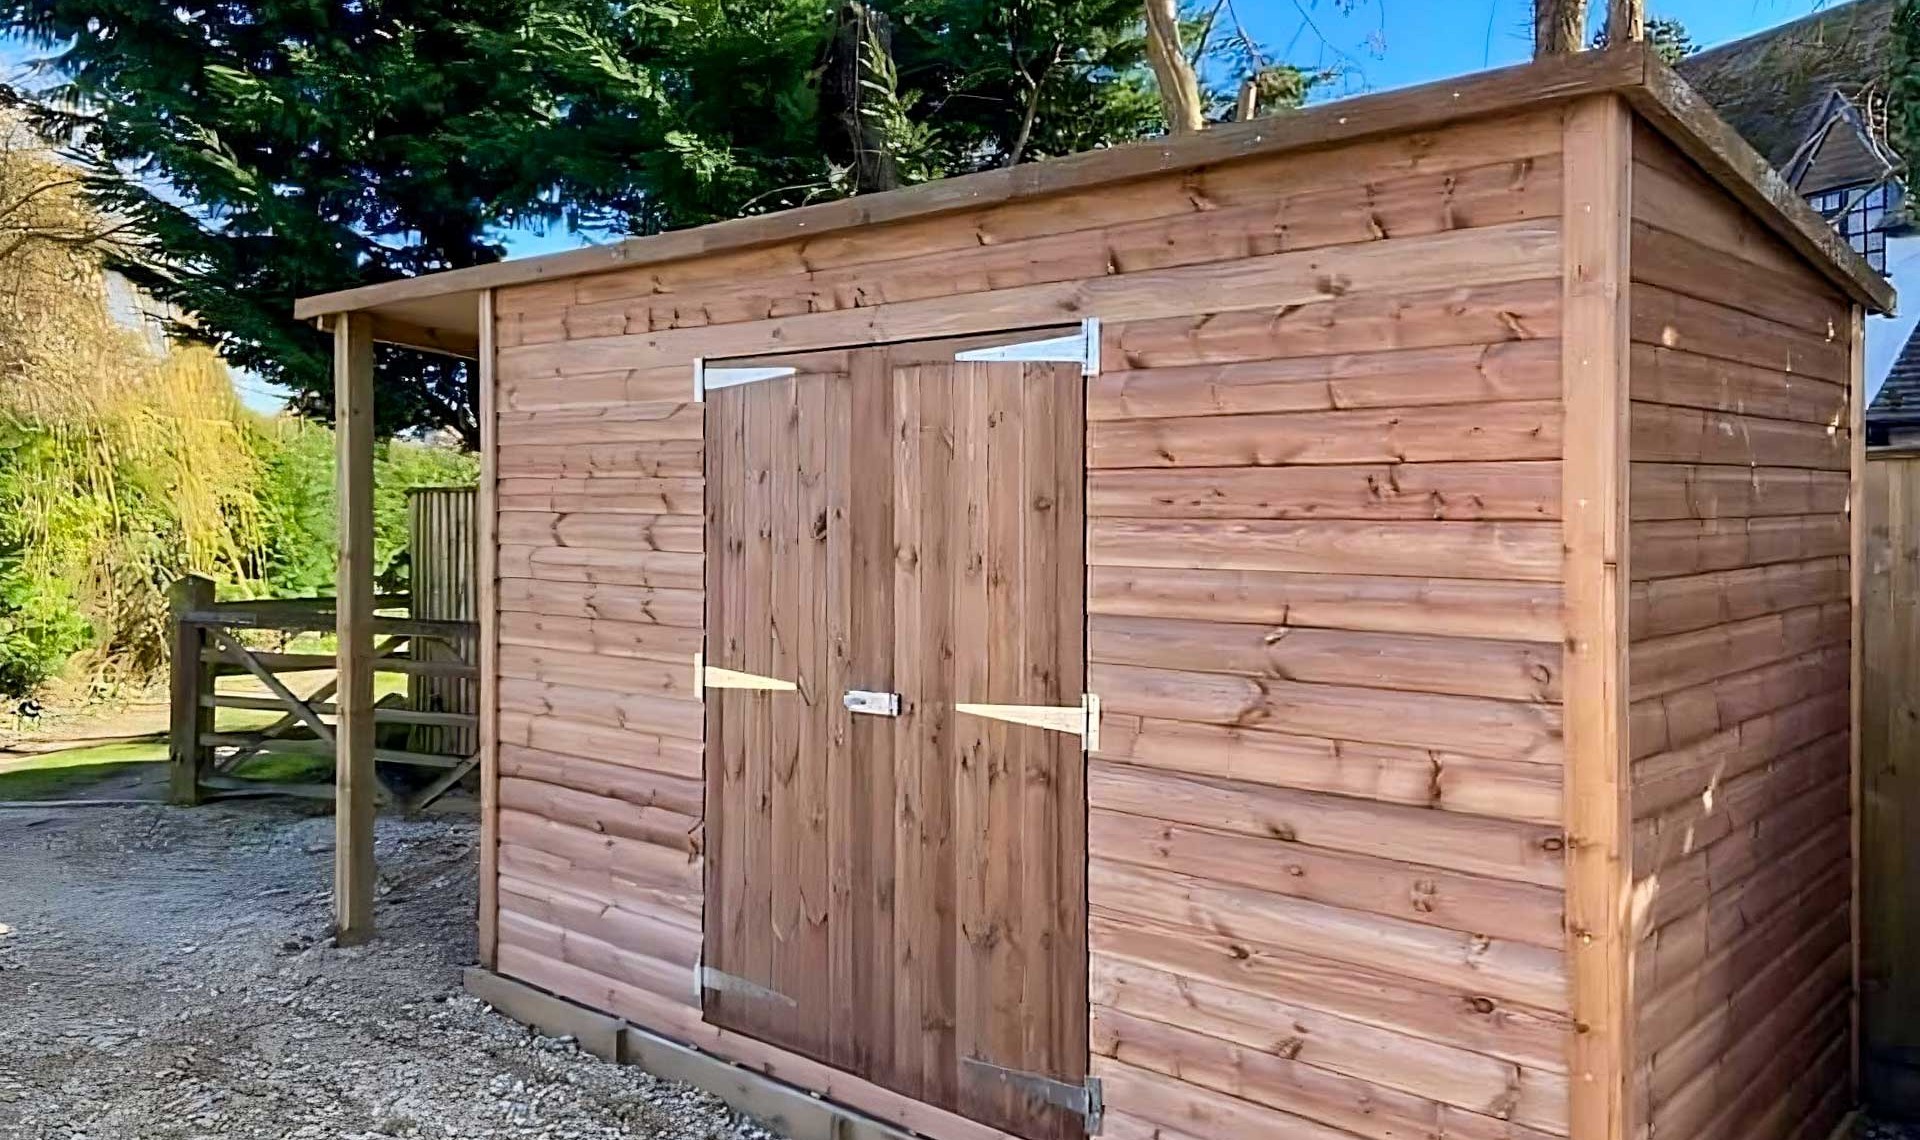 Large timber shed with double doors and shelter on the side.